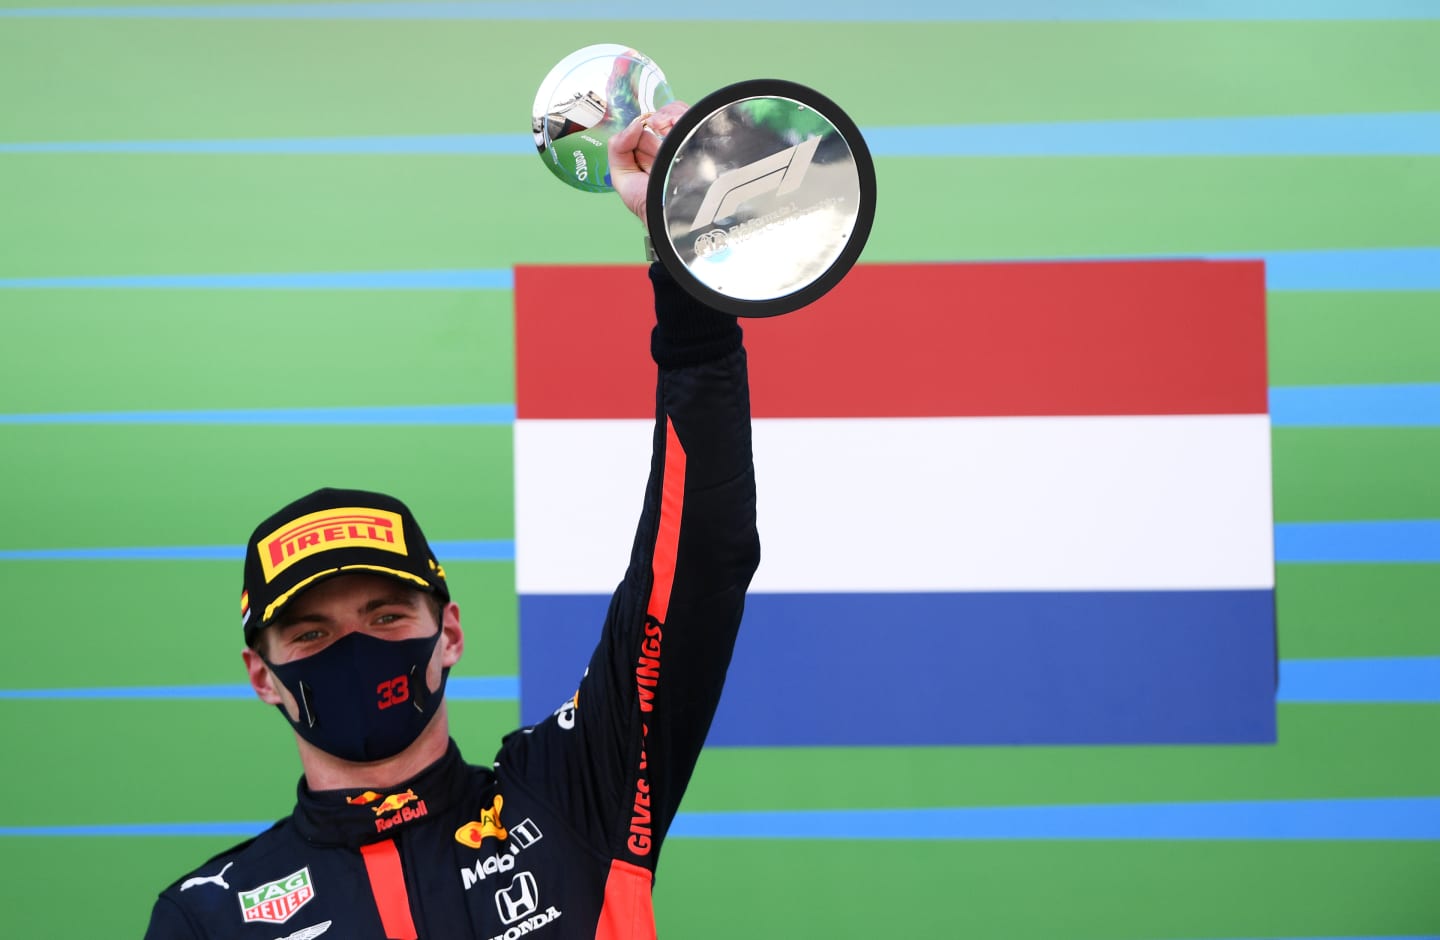 BARCELONA, SPAIN - AUGUST 16: Second placed Max Verstappen of Netherlands and Red Bull Racing